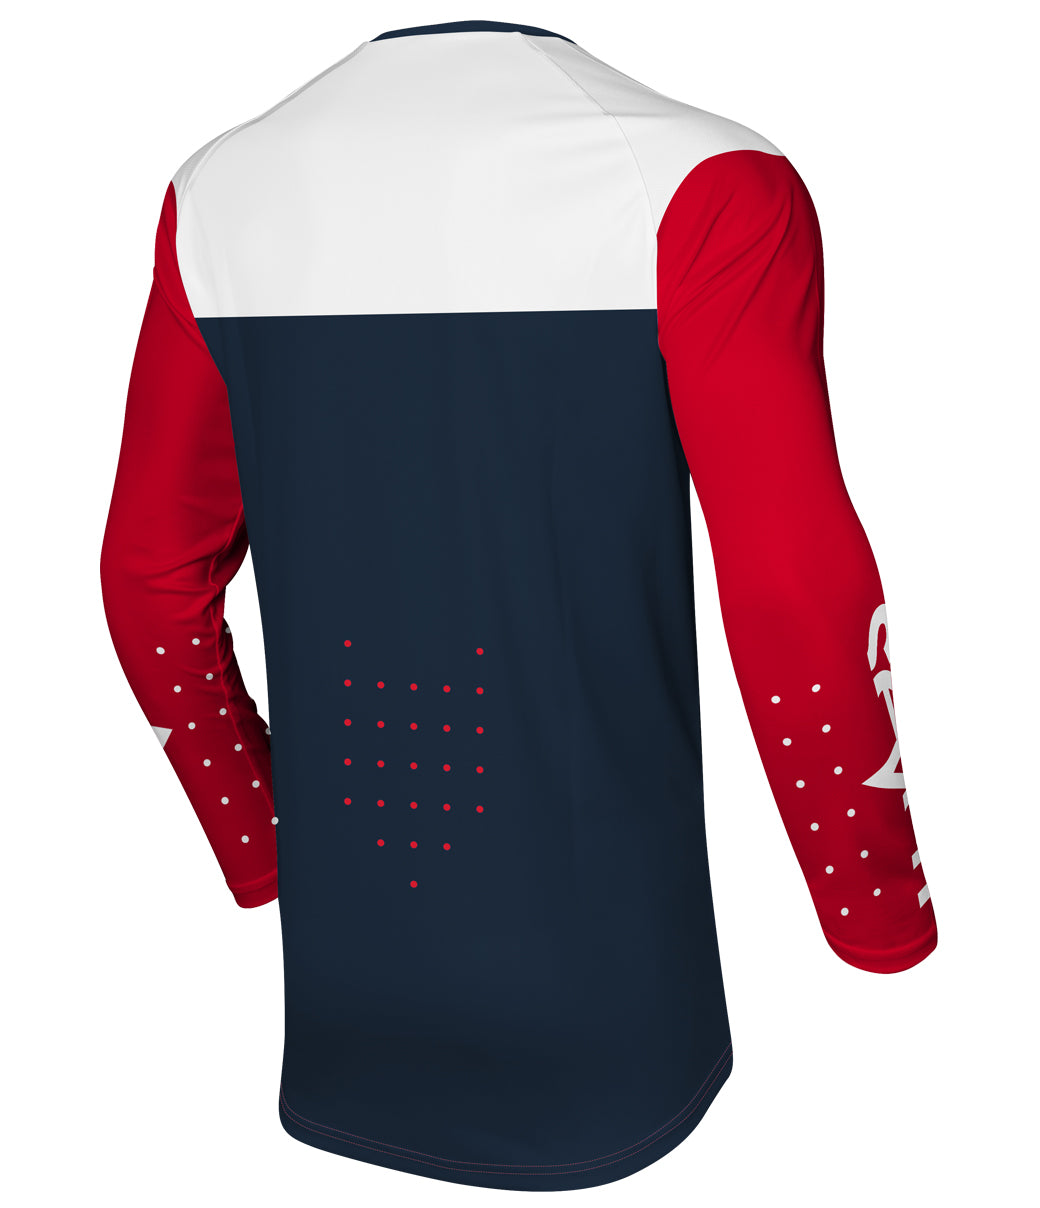 Youth Vox Aperture Jersey Red/Navy